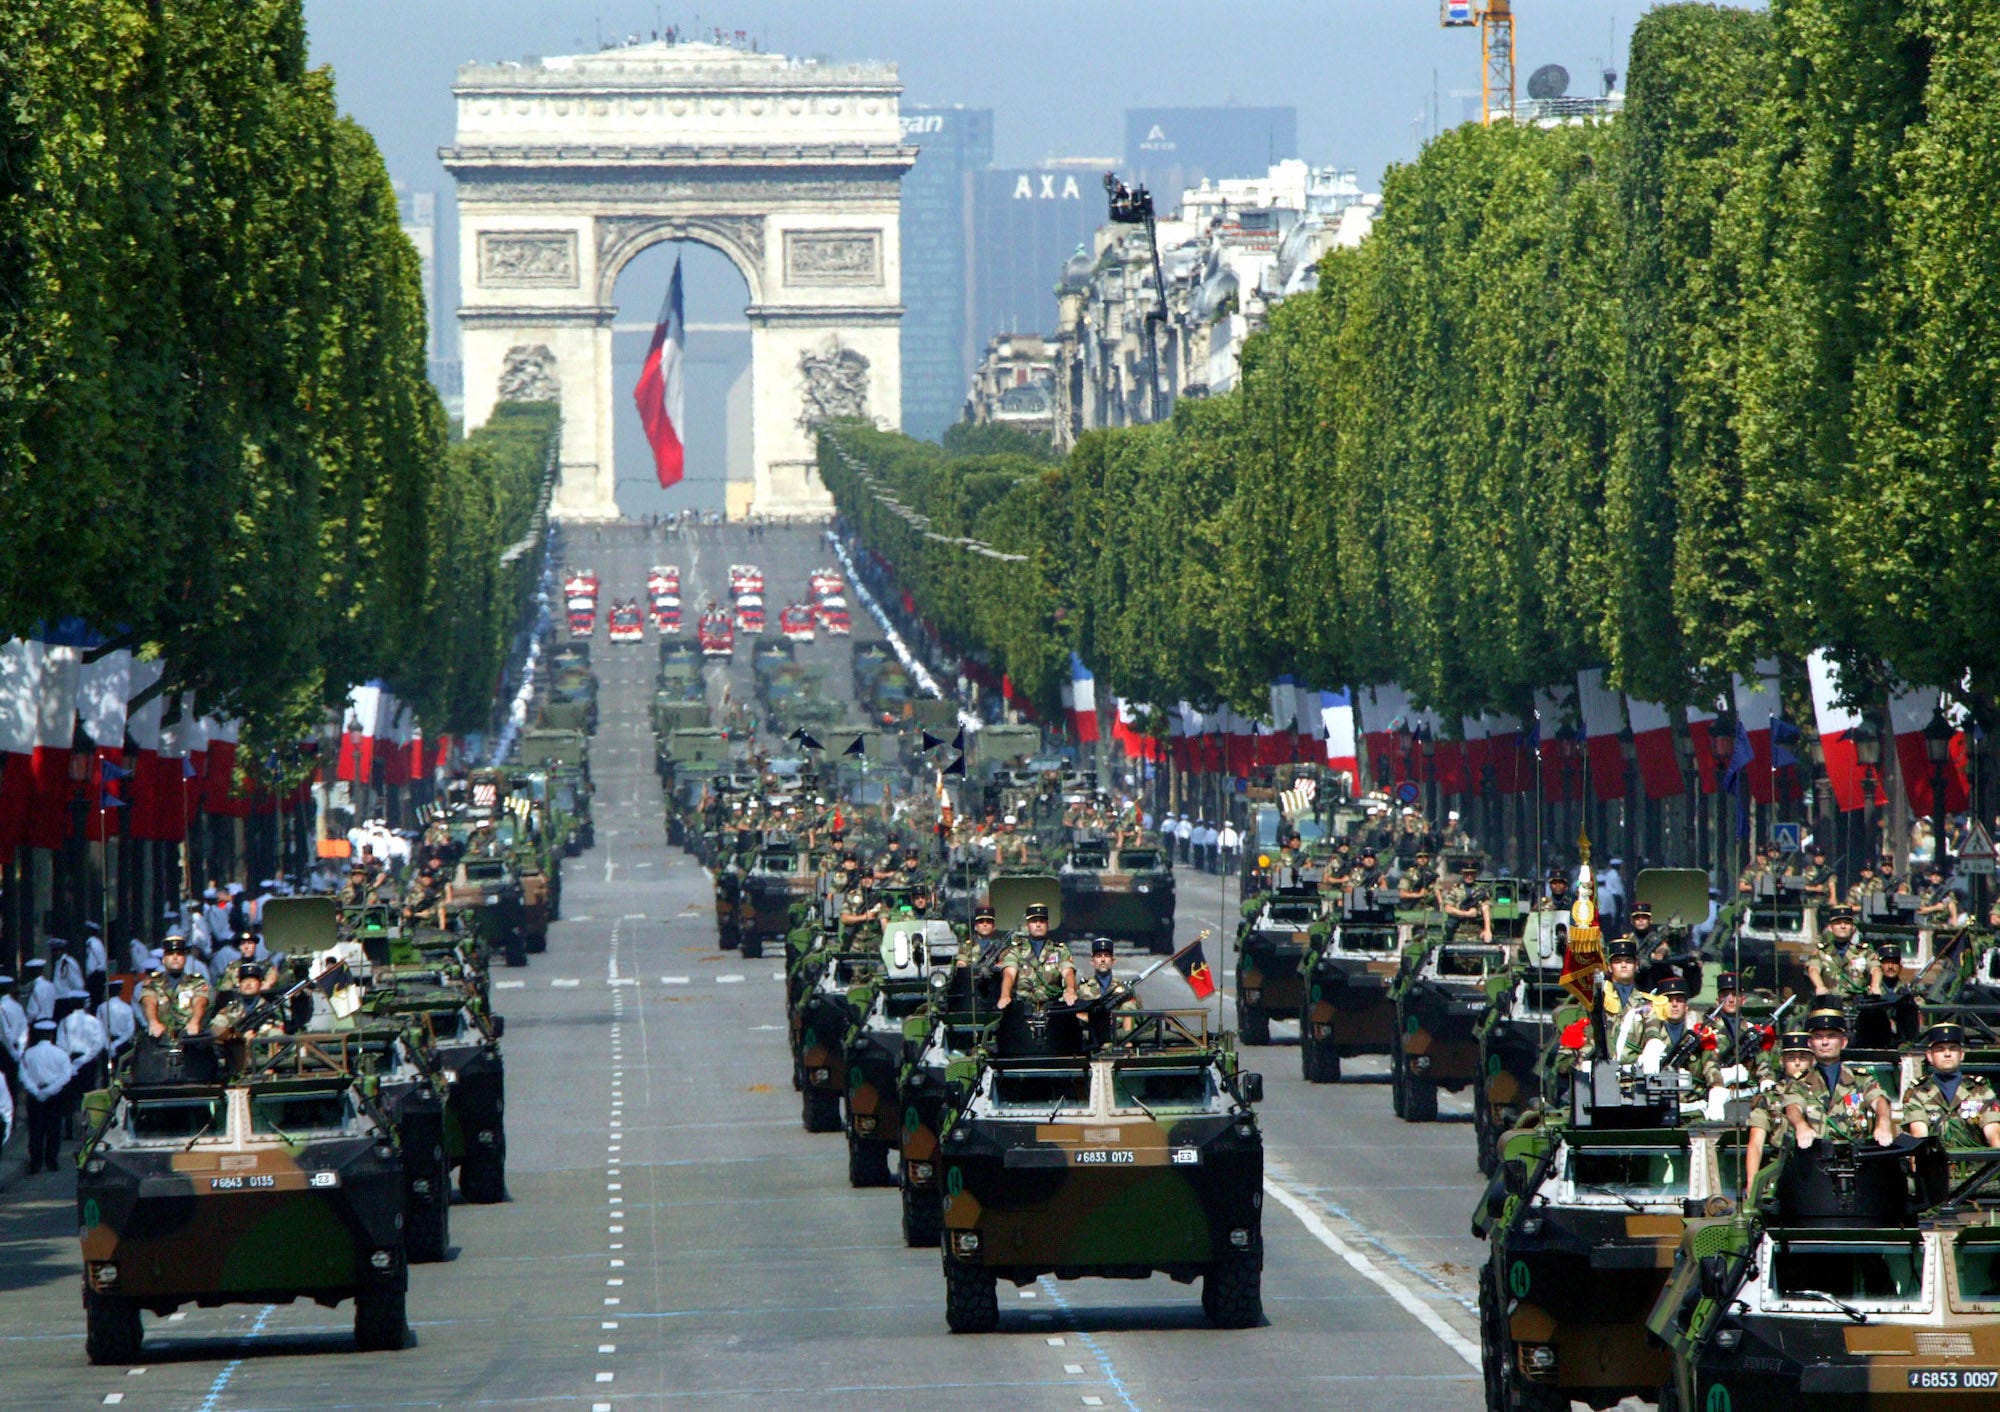 Armoured cars drive down the Avenue des Champs Elysees in Paris July 14, 2005 during the annual Bastille Day parade.